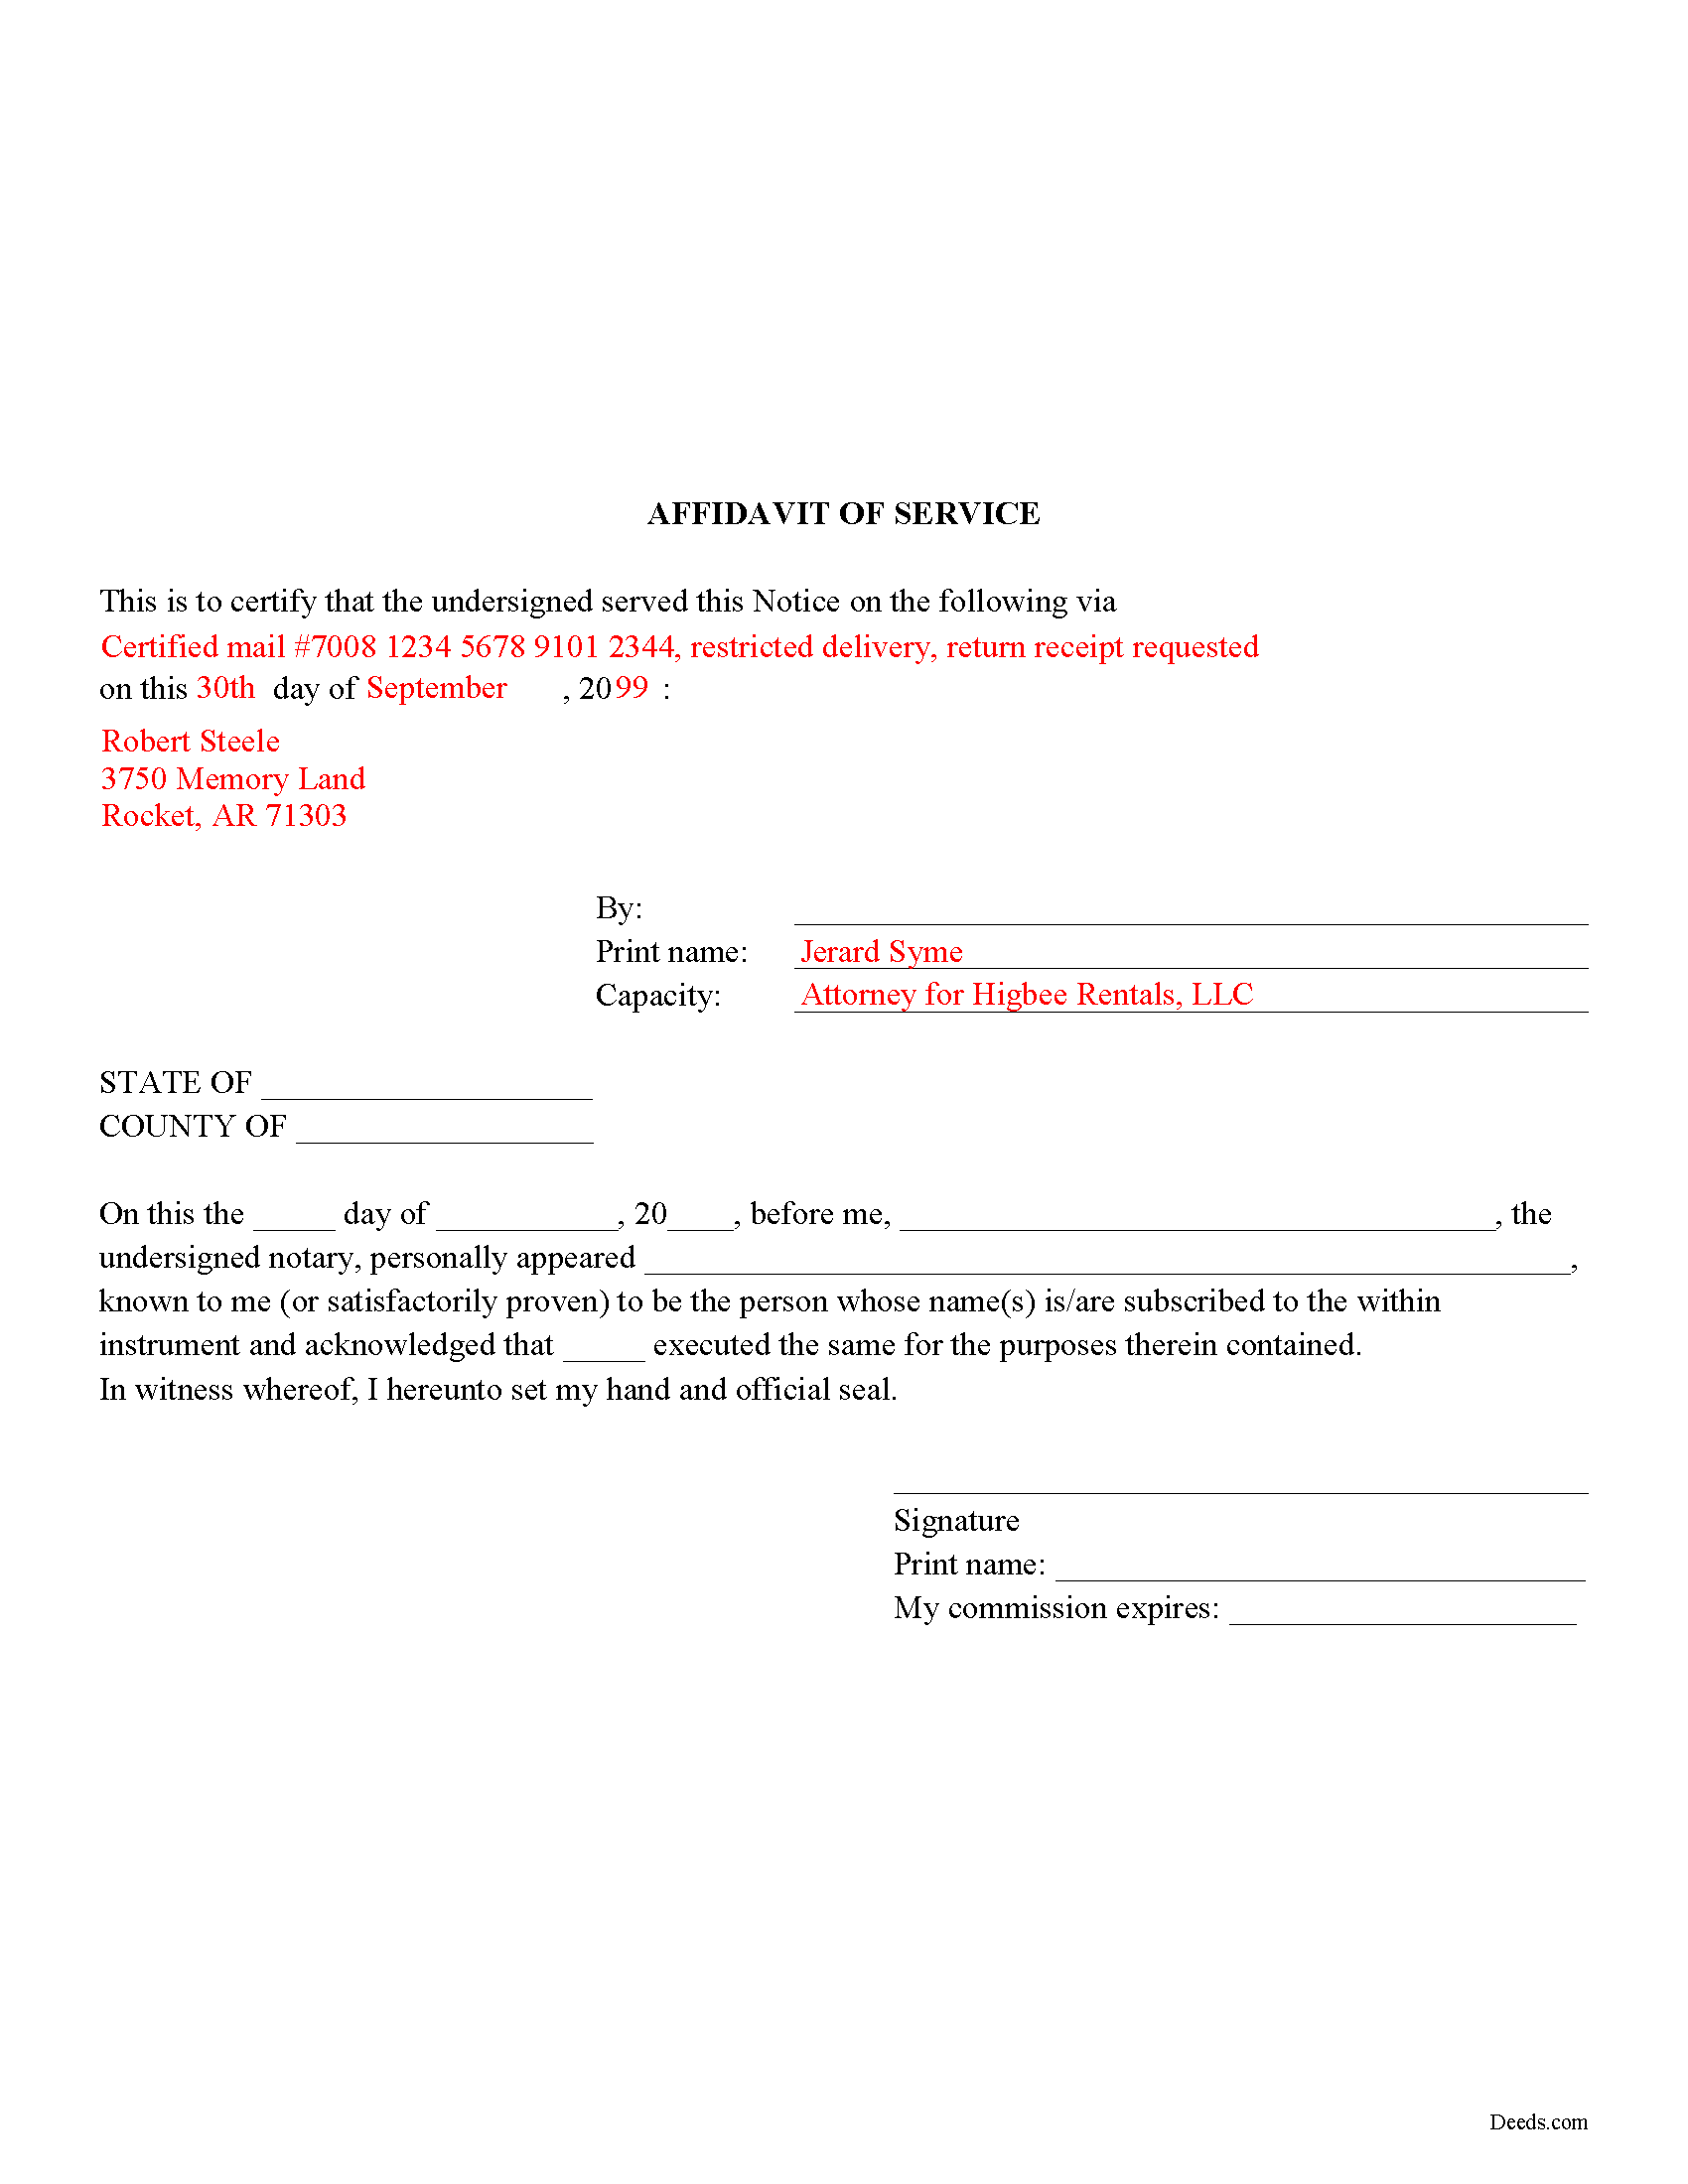 Completed Example of the Affidavit of Service Document